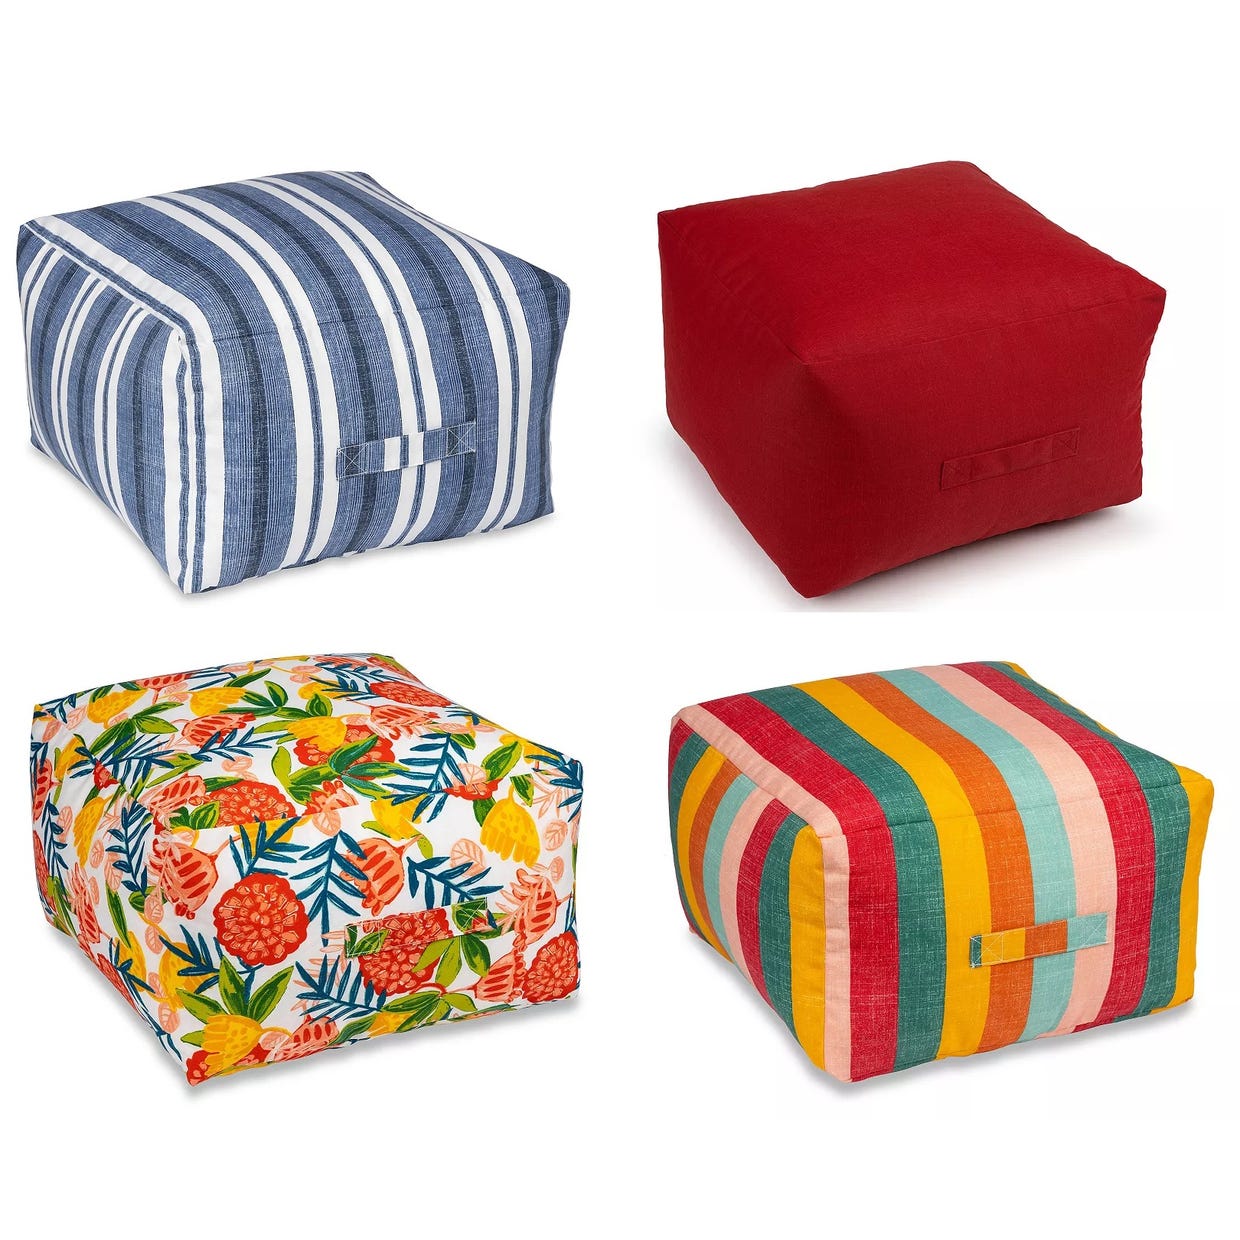 Four colorful square ottomans: one with blue stripes, a solid red one, a multicolored floral design, and a striped one with various bright colors.